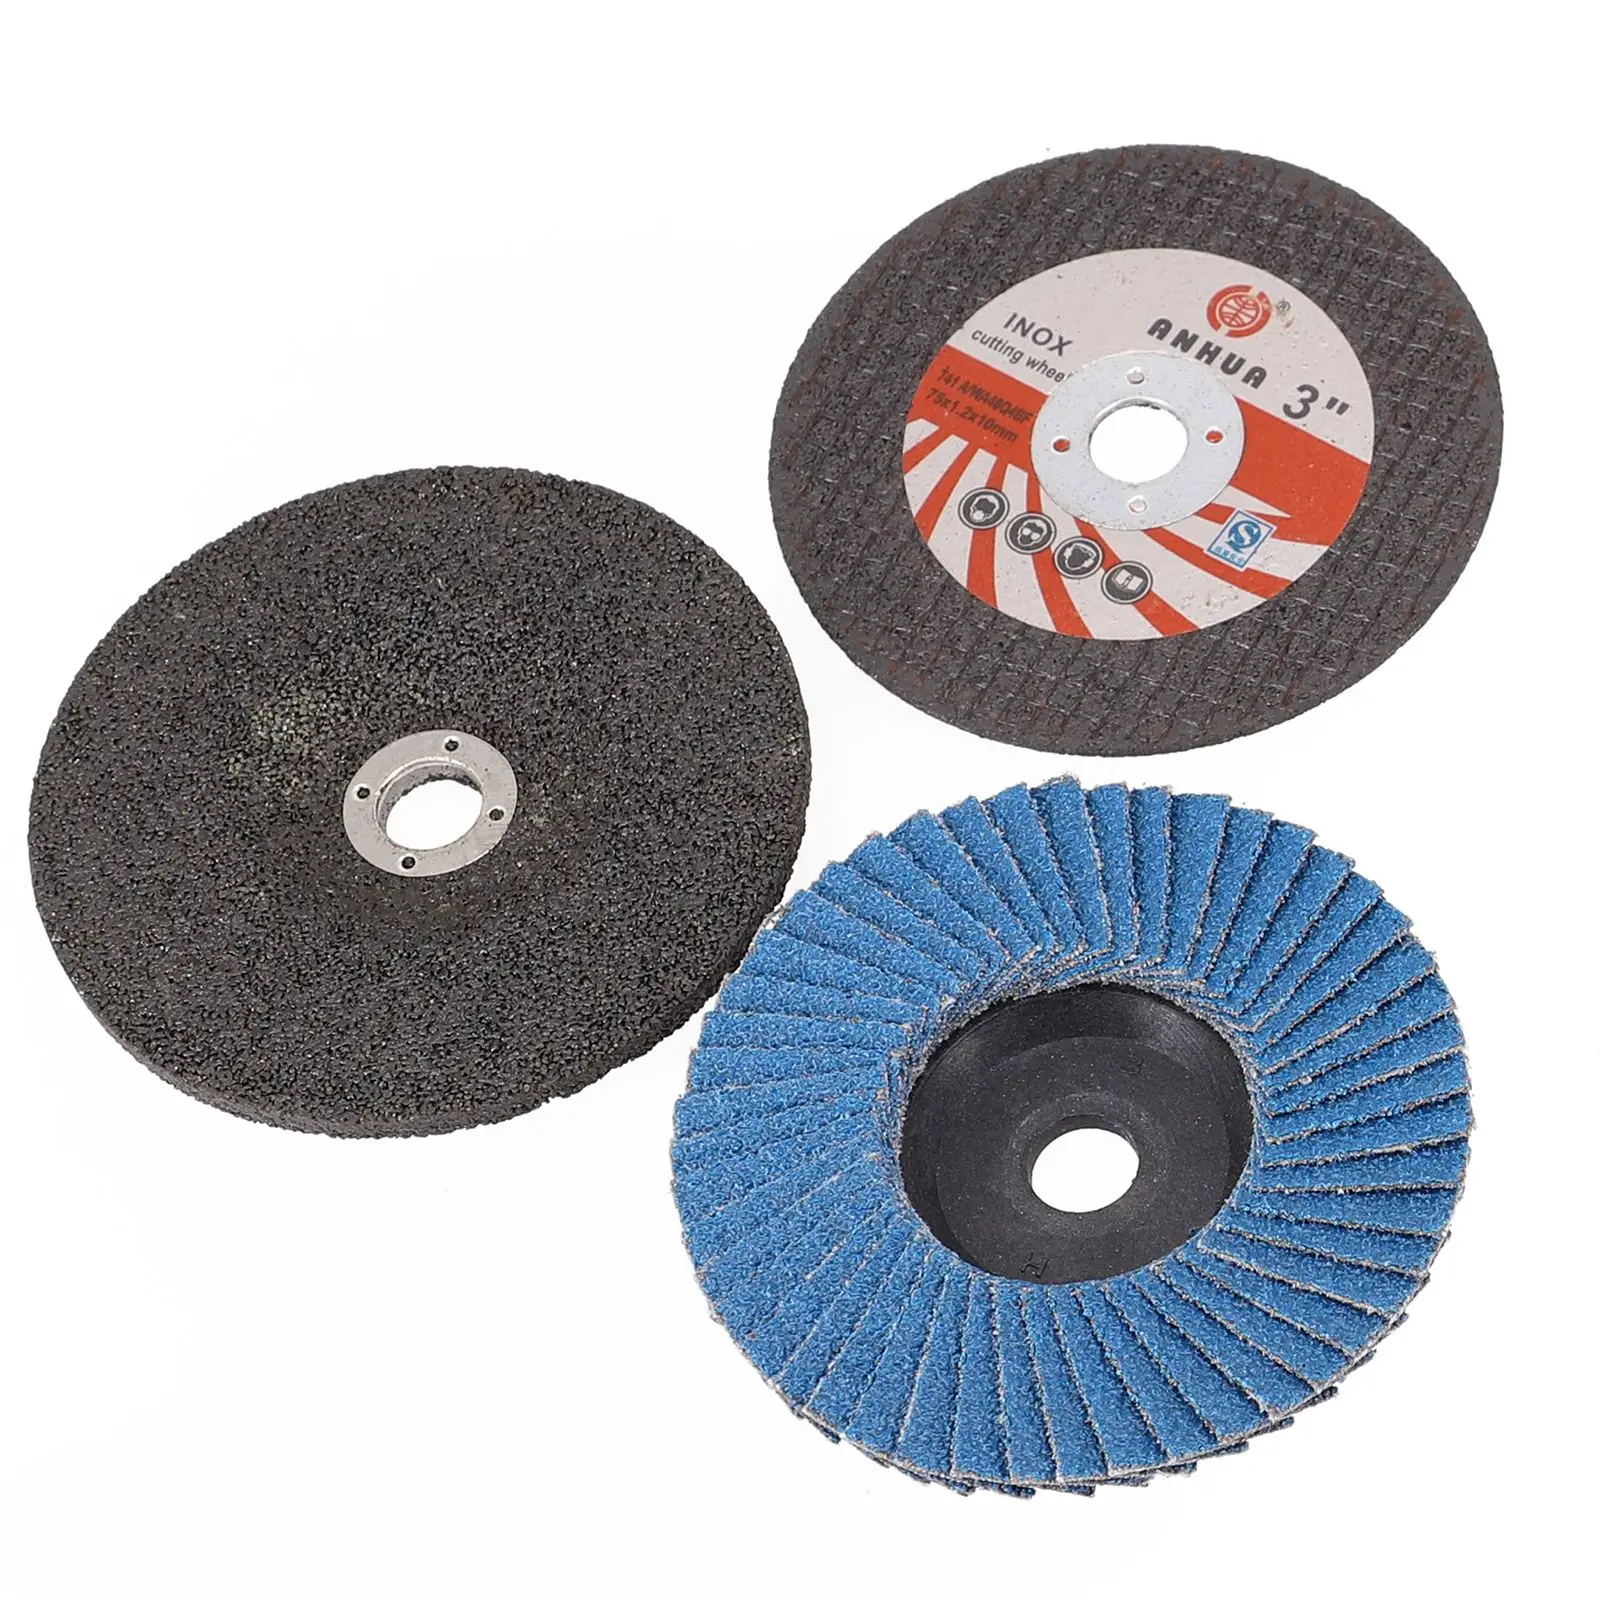 Brand New Cutting Disc Grinding Wheel Circular Saw Blade For Angle Grinder For Ceramic Tile Wood Polishing Disc